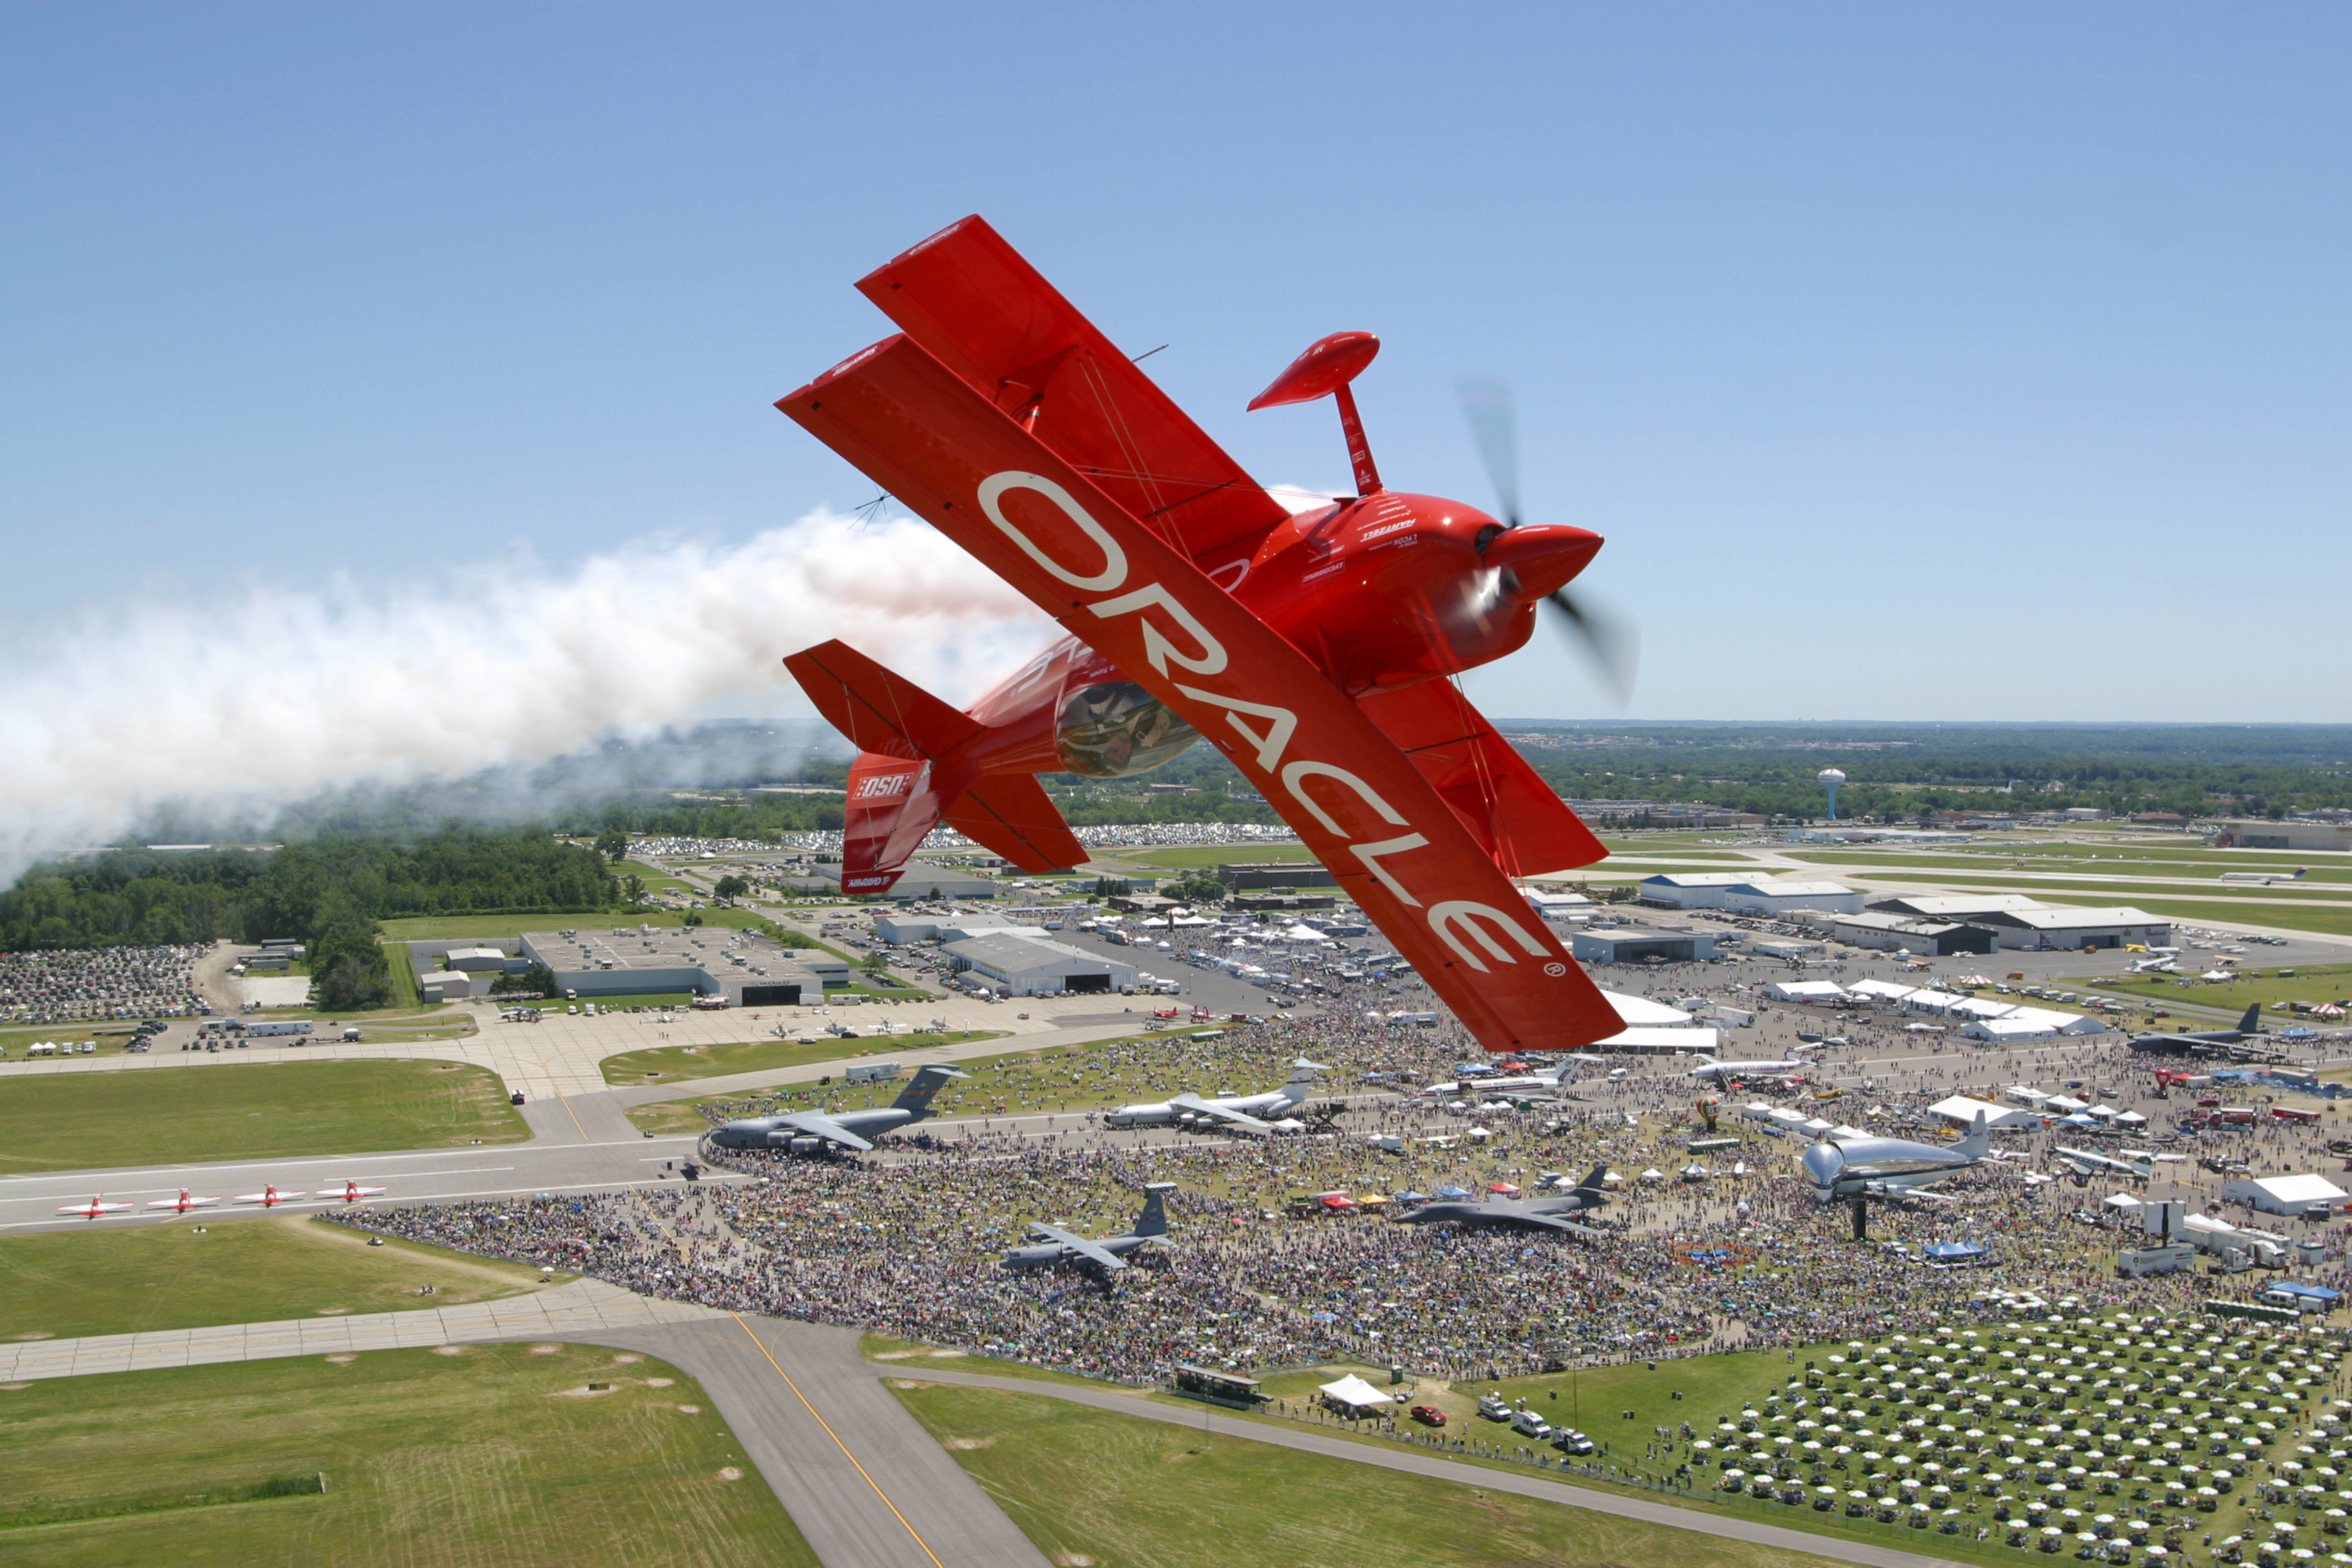 Dayton Air Show: What to know before you go